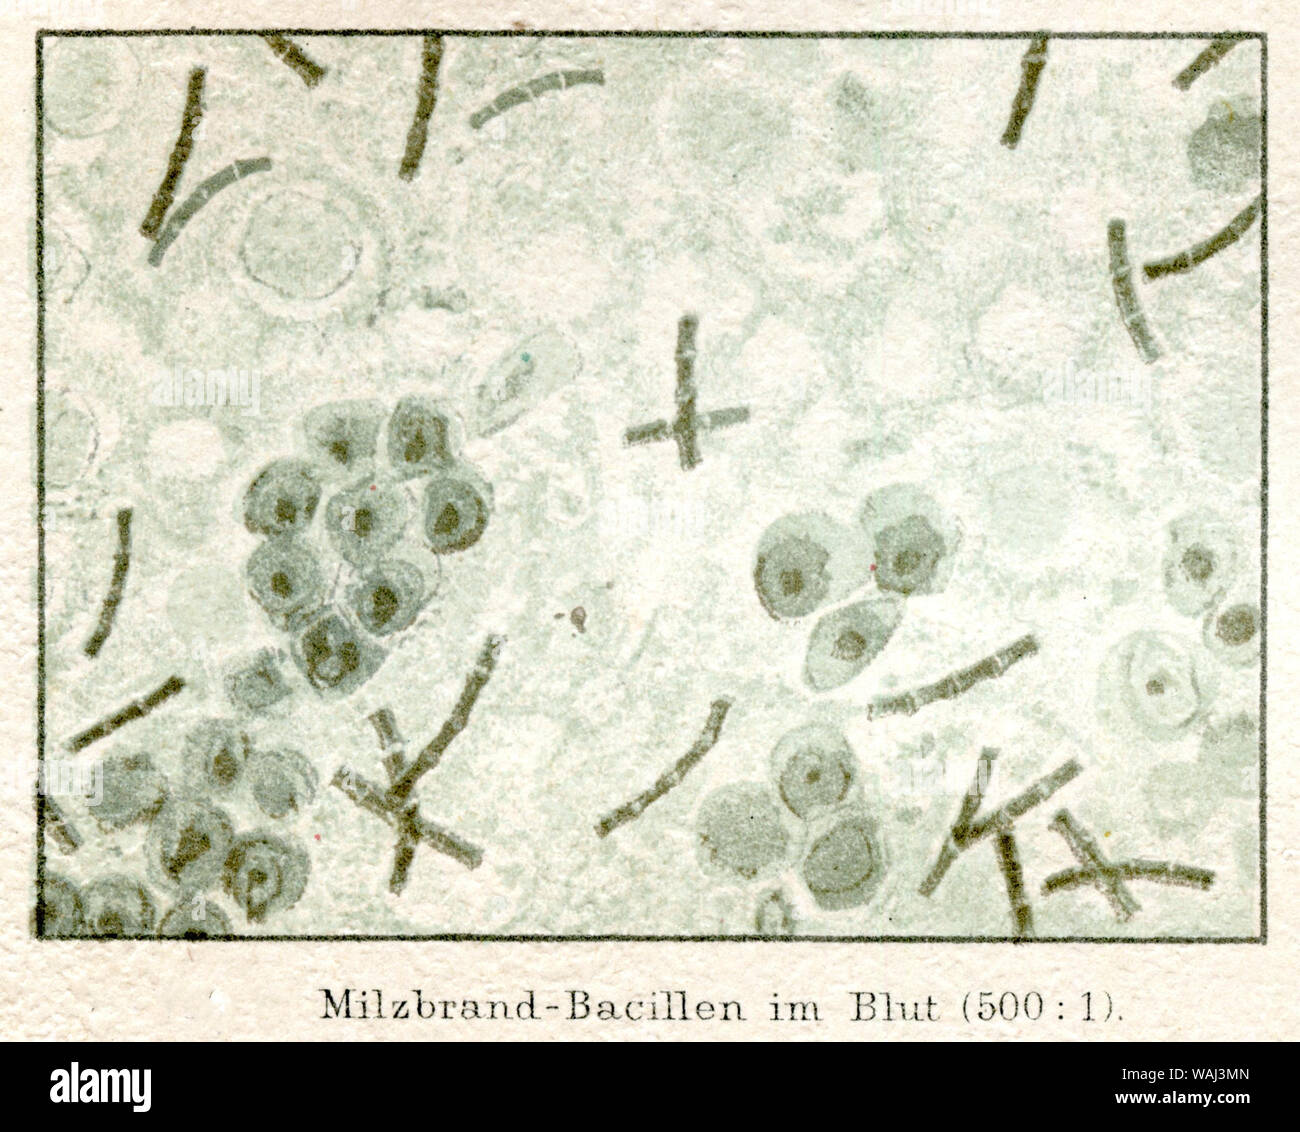 Anthrax bacteria in the blood of a patient under the microscope (500:1). ,  (encyclopedia, 1885) Stock Photo